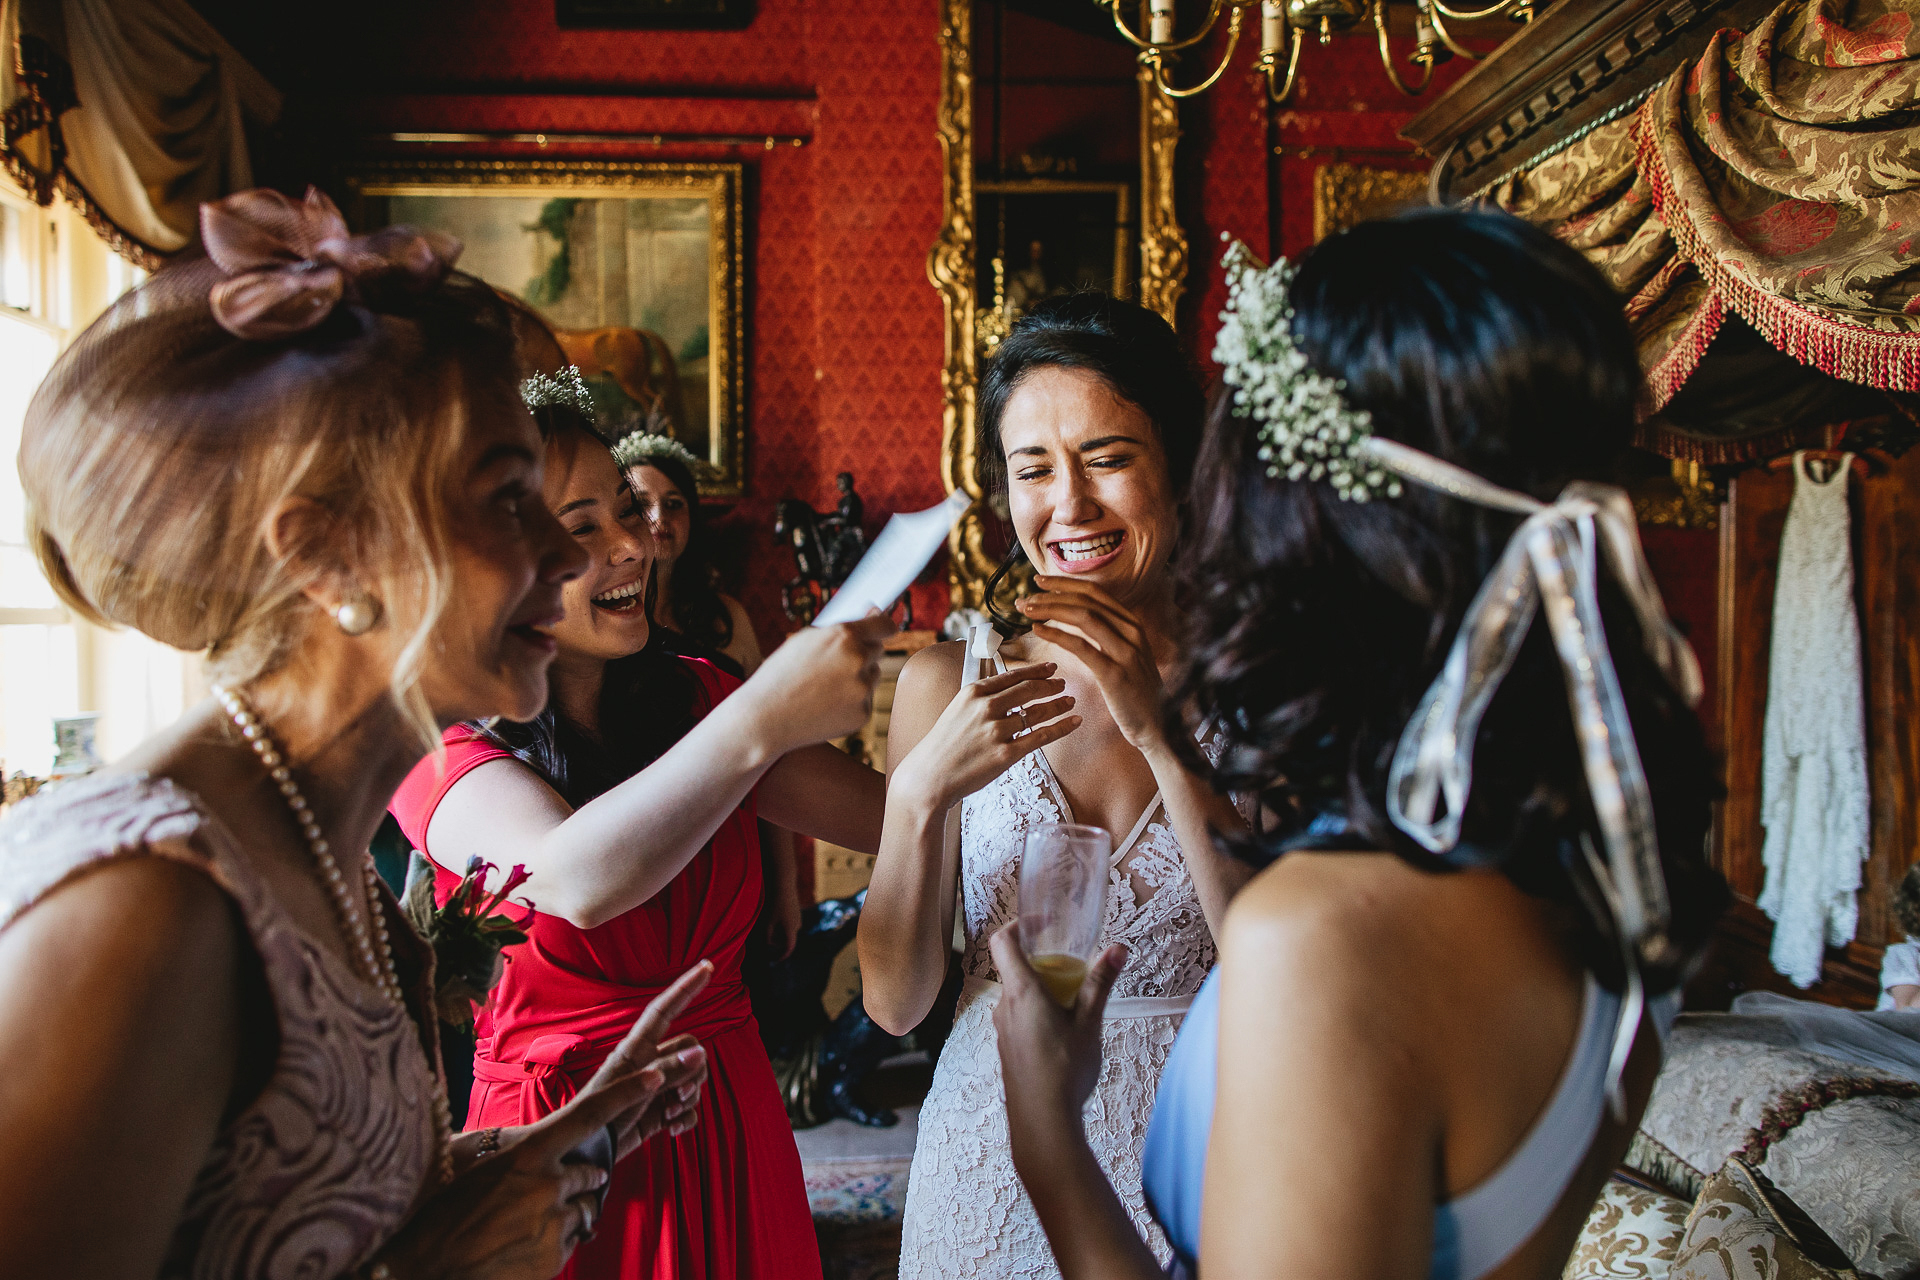 Bride overwhelmed by emotion during wedding preparations